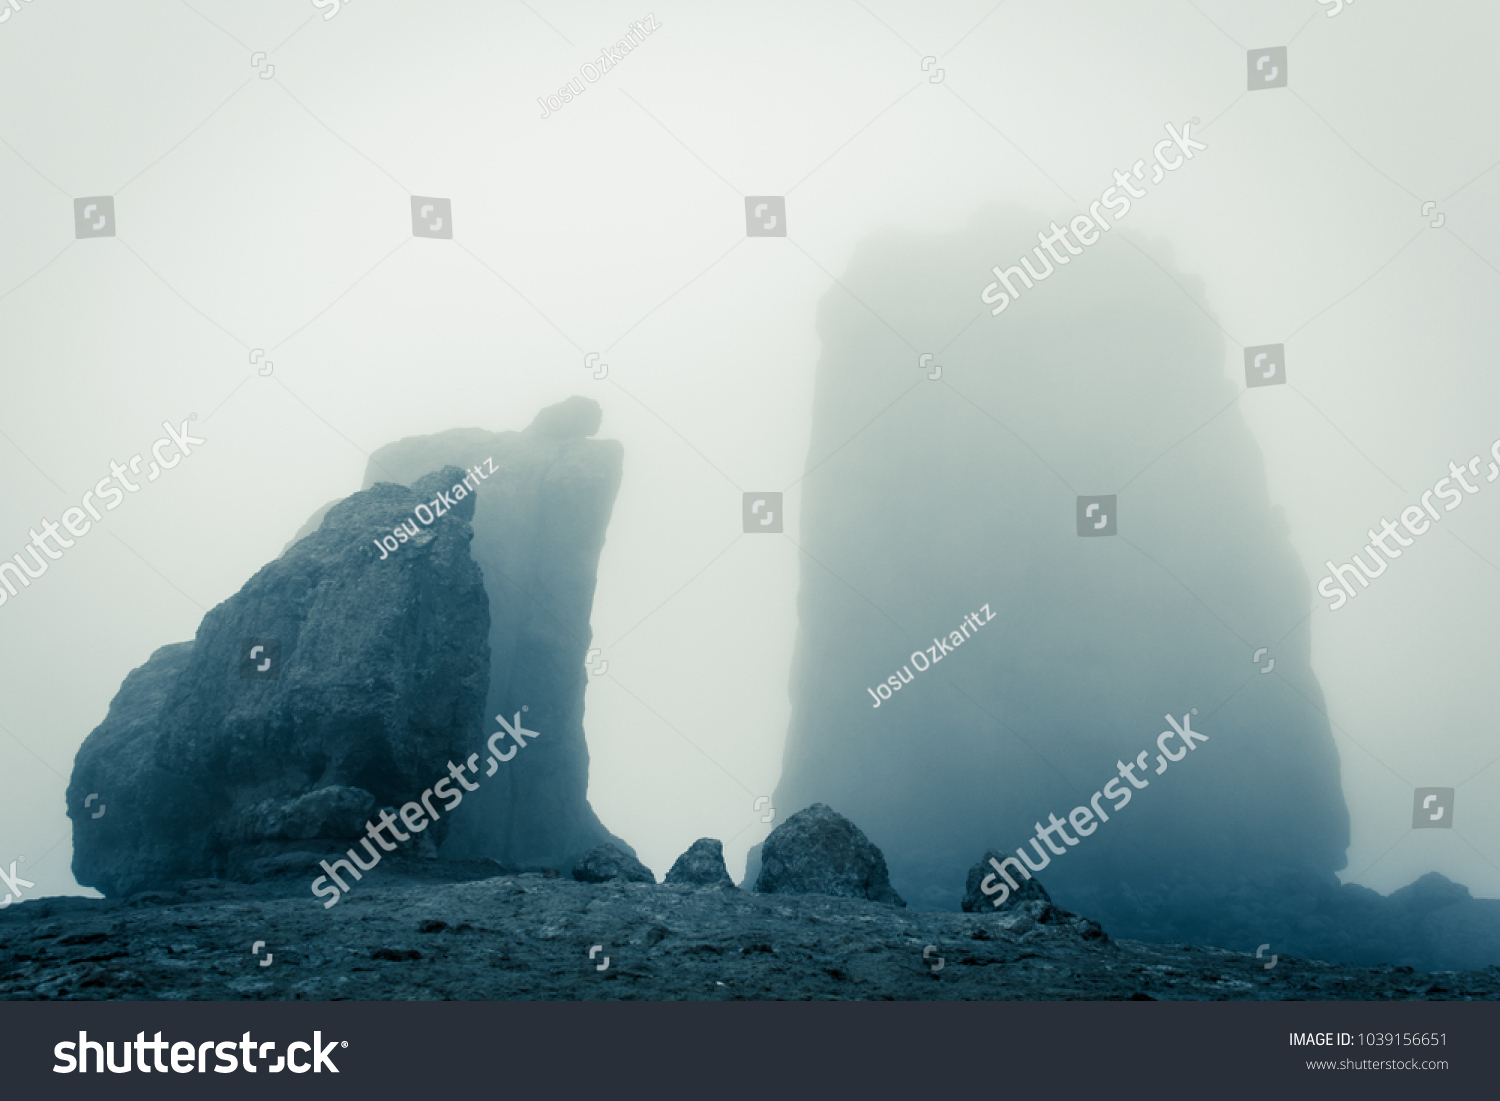 Roque Nublo big rock mountain covered with heavy fog in Gran Canaria, Spain. Futuristic sci fi landscape setting. Thriller, mysterious empty space. Blue effect #1039156651